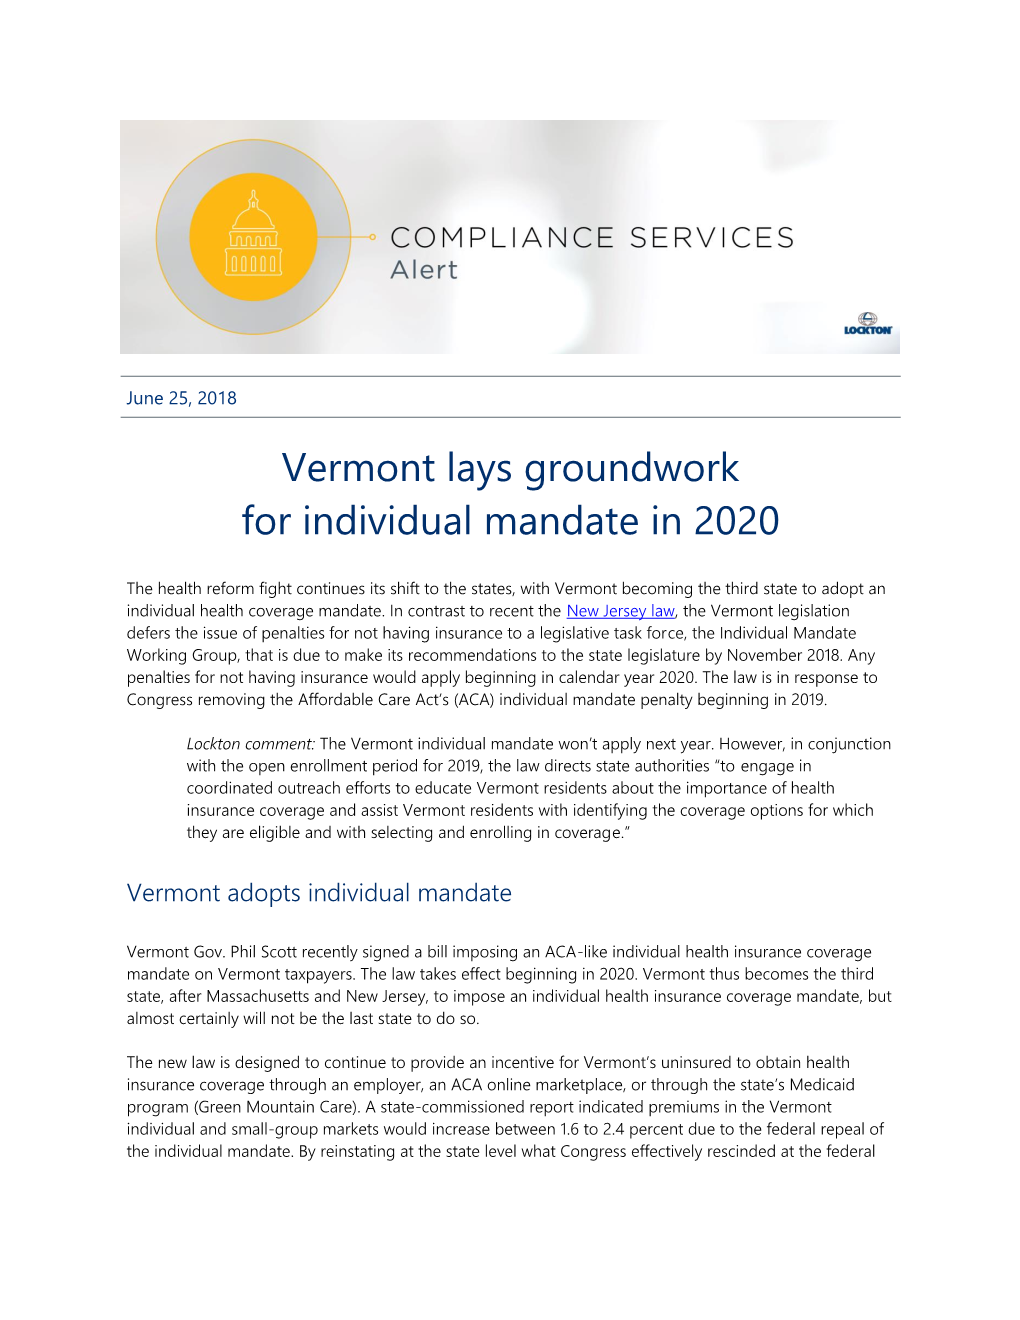 Vermont Lays Groundwork for Individual Mandate in 2020